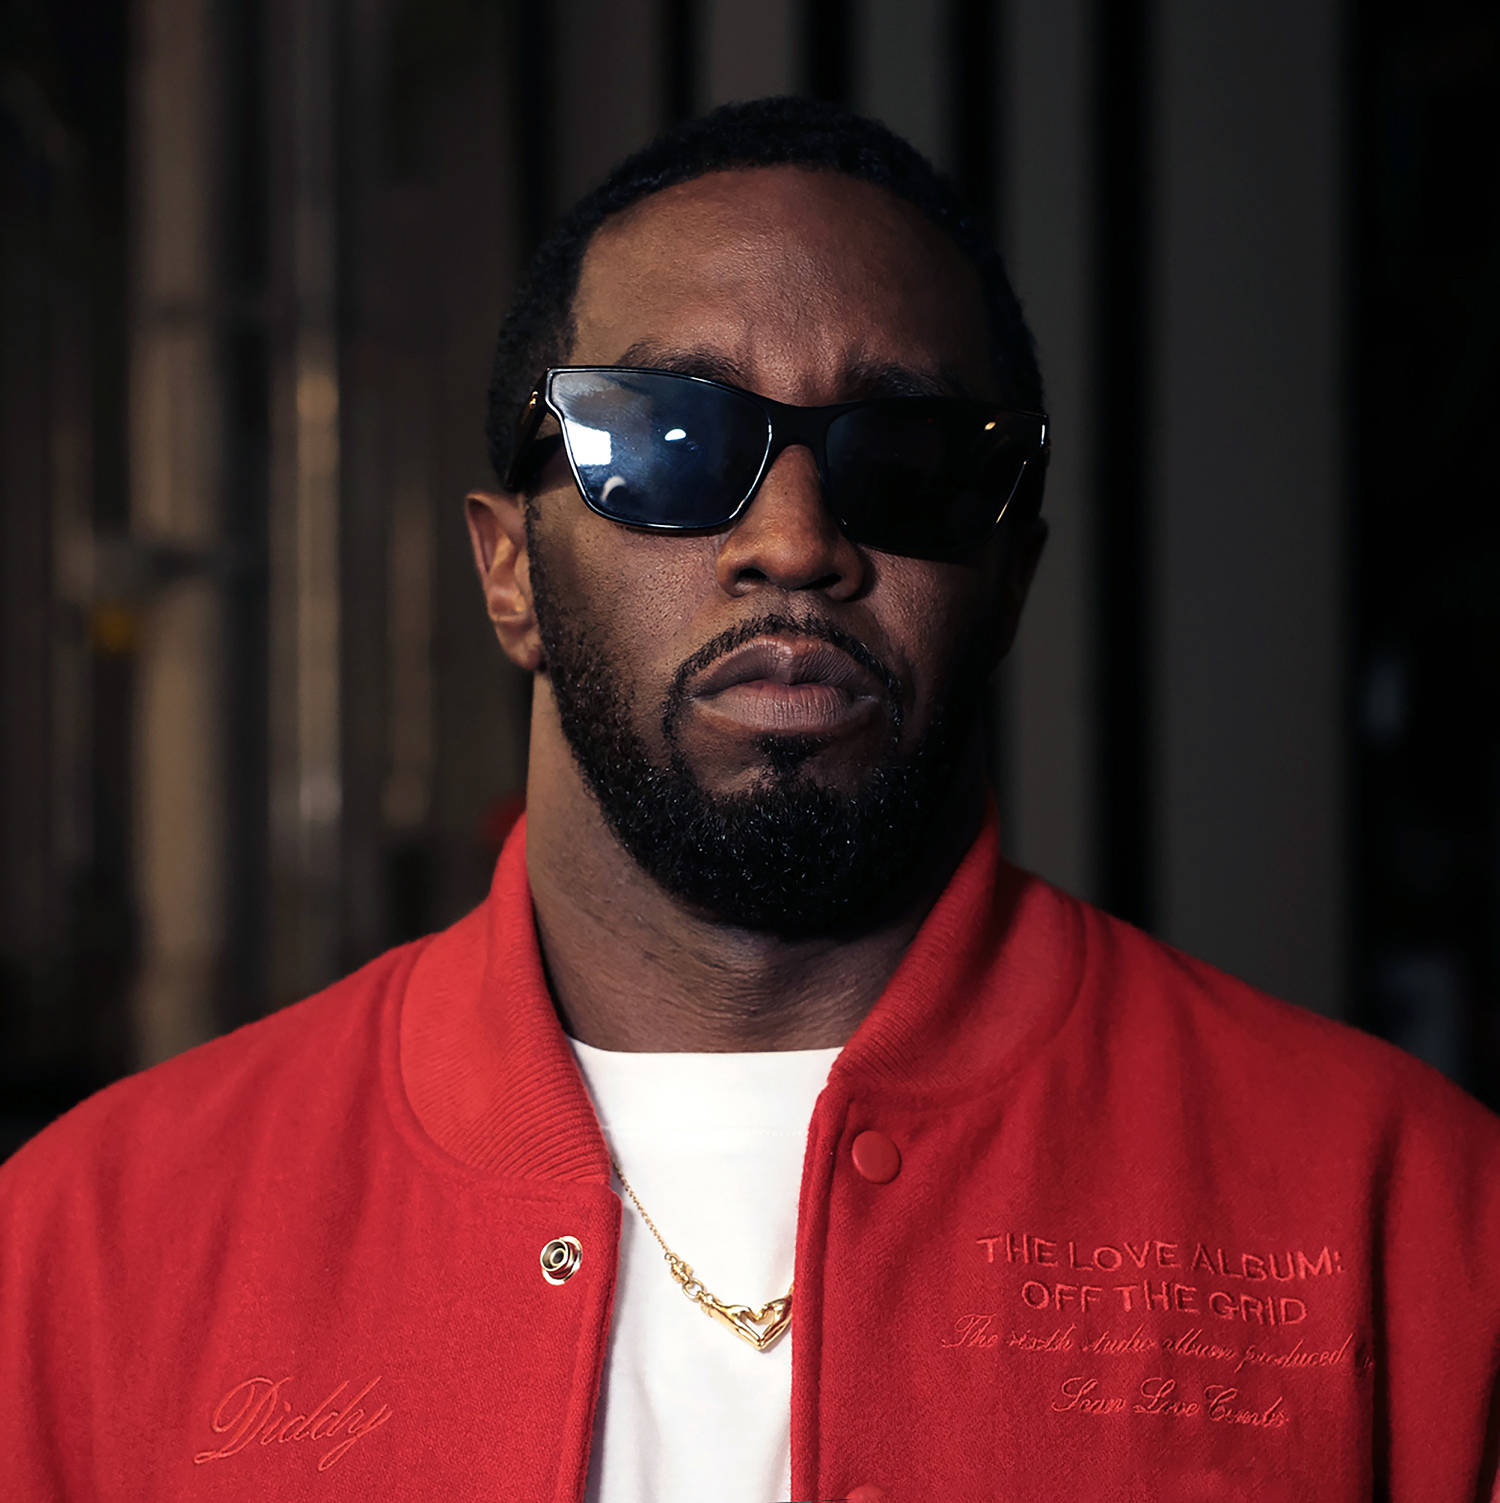 Producer alleges in new complaint that Sean ‘Diddy’ Combs was involved in shooting at recording studio